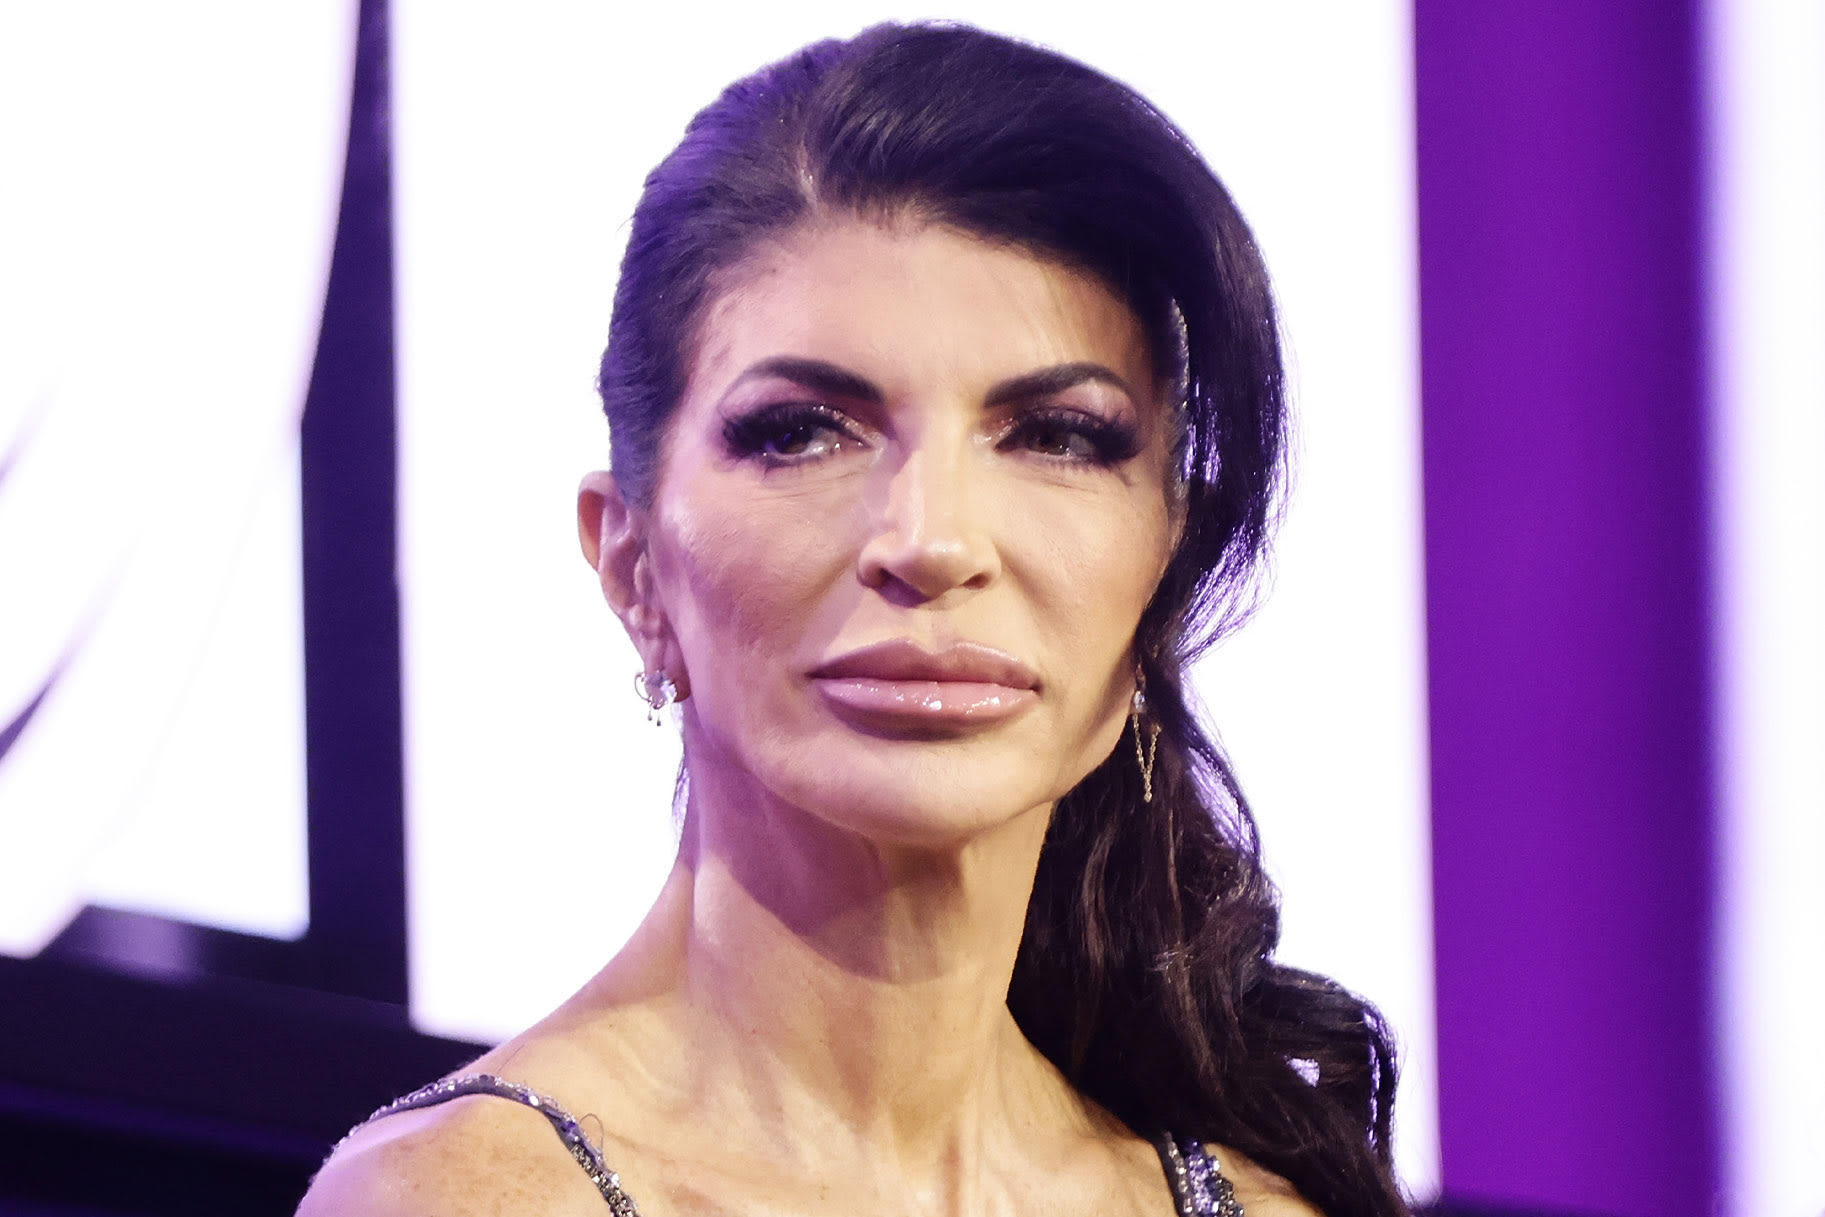 Teresa Giudice Opens Up on How She Was Able To "Forgive" After Going to Prison (VIDEO) | Bravo TV Official Site